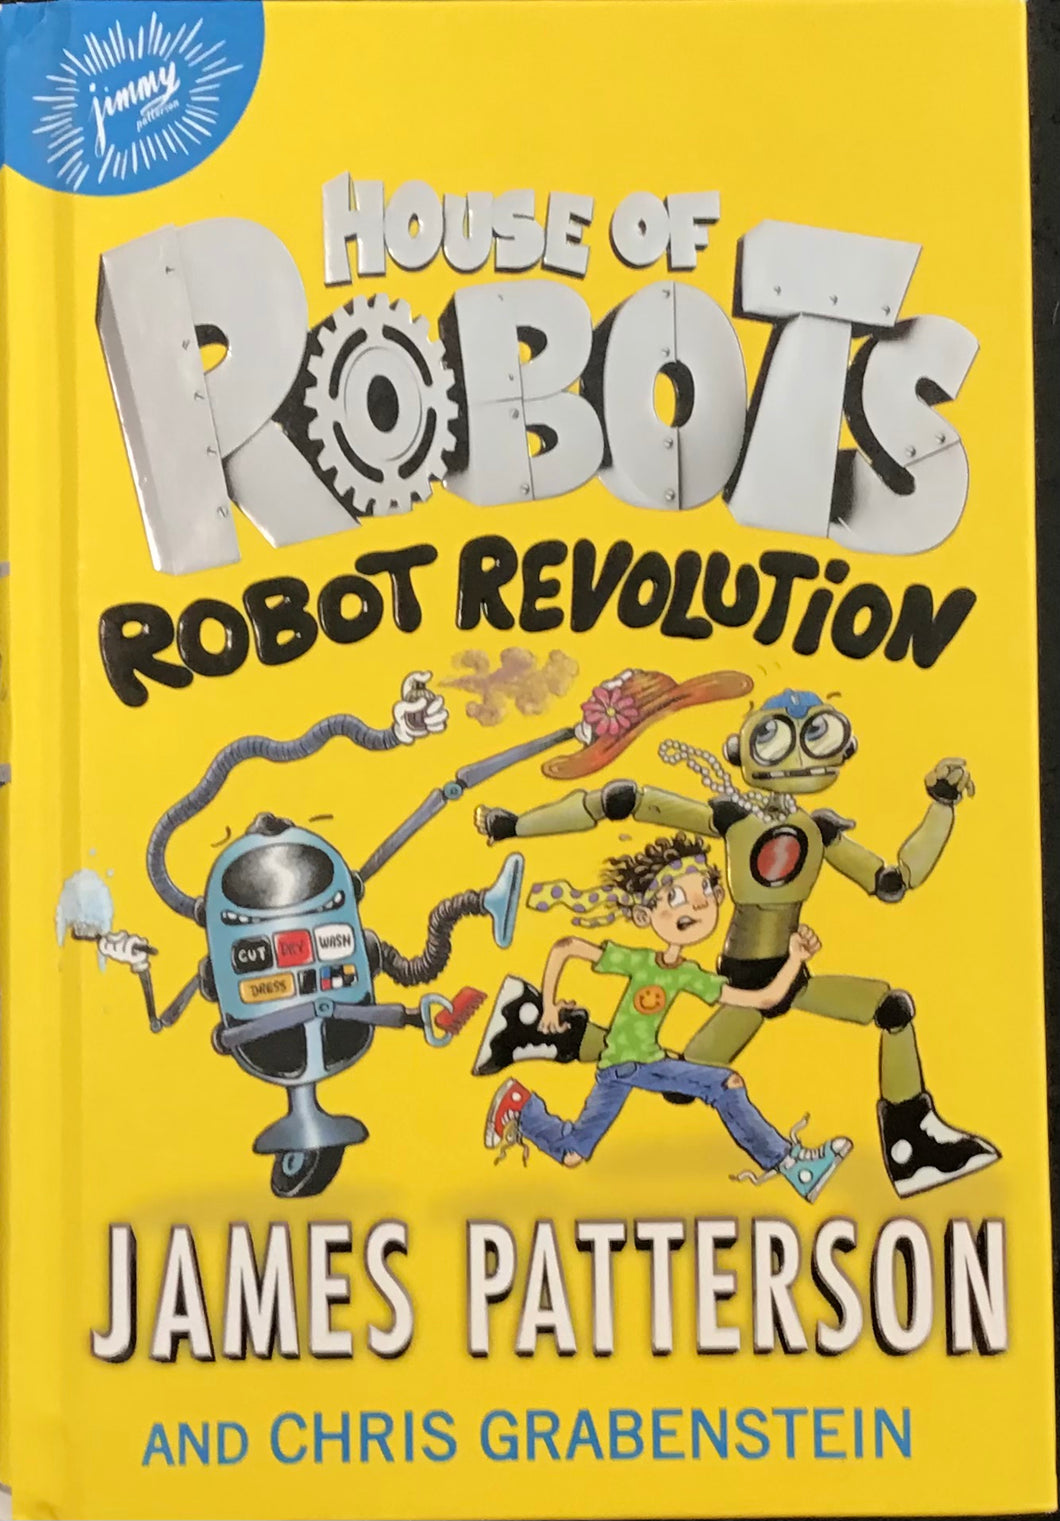 House of Robots, James Patterson and Chris Grabenstein